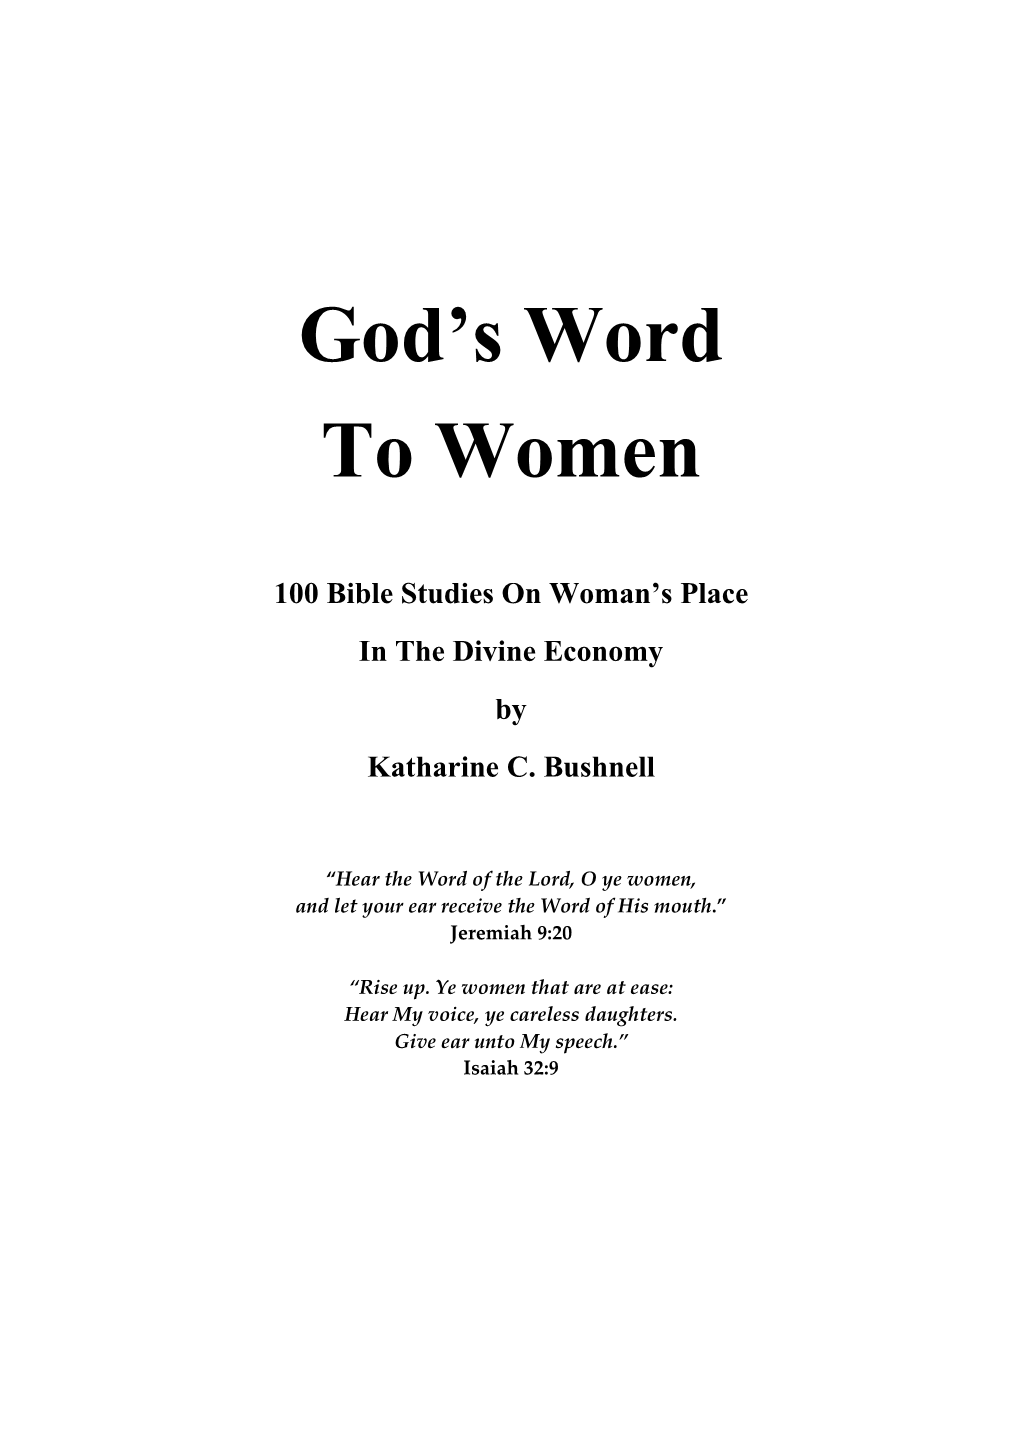 God's Word to Women 100 Bible Studies on Woman's Place in The